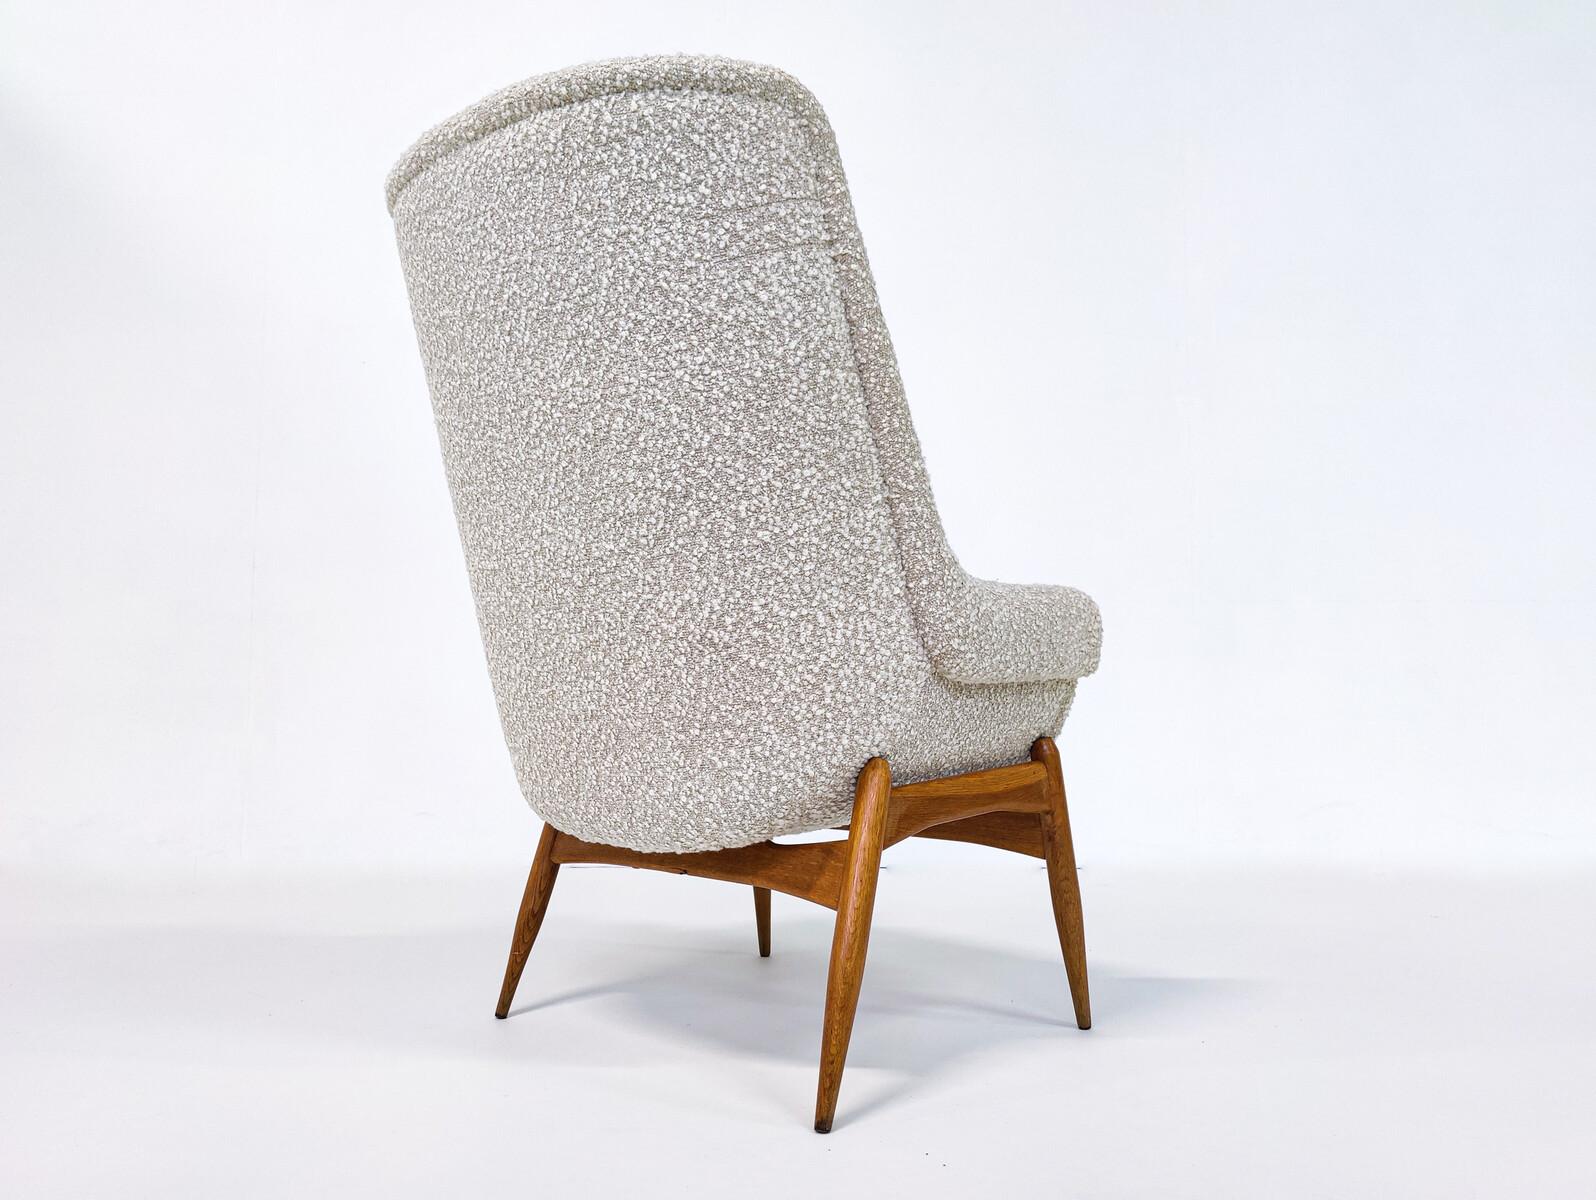 Pair of Mid-Century Modern Beige Fabric Armchairs by Julia Gaubek, Hungary, 1950 For Sale 5